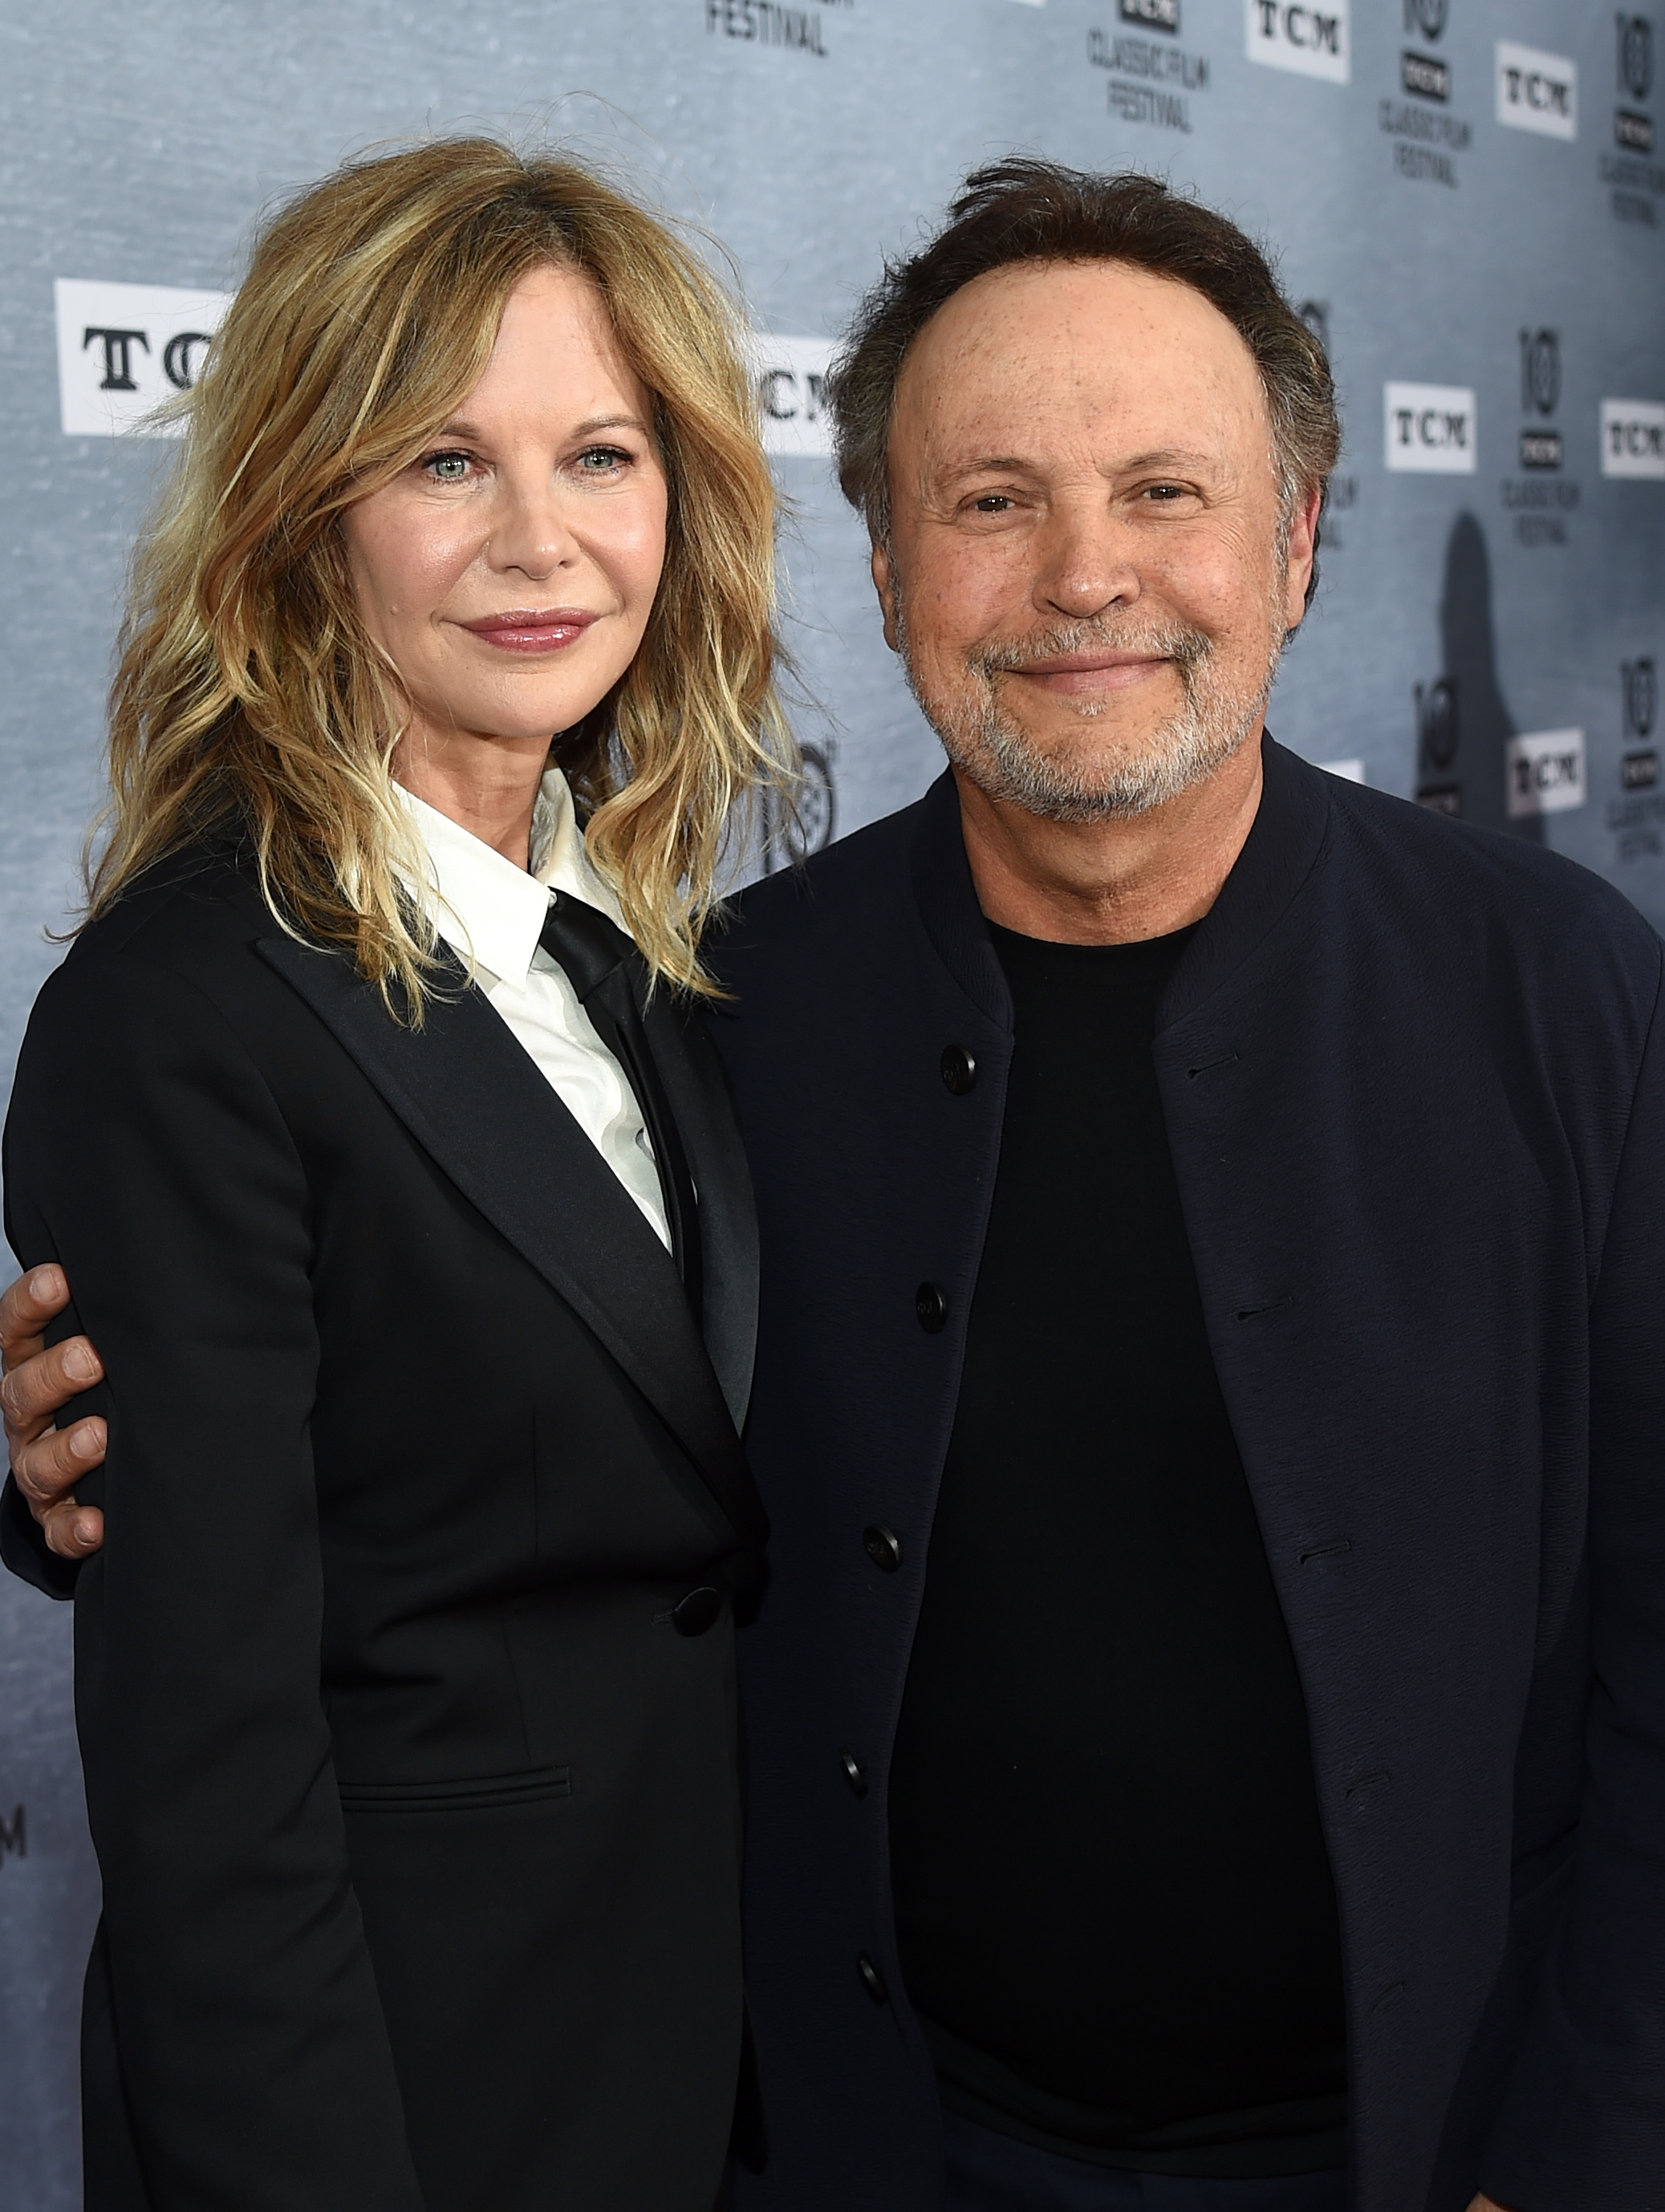 Meg Ryan and Billy Crystal at the "When Harry Met Sally..." Reunion at the TCL Chinese Theatre on April 11, 2019 in Los Angeles, California. | Source: Getty Images